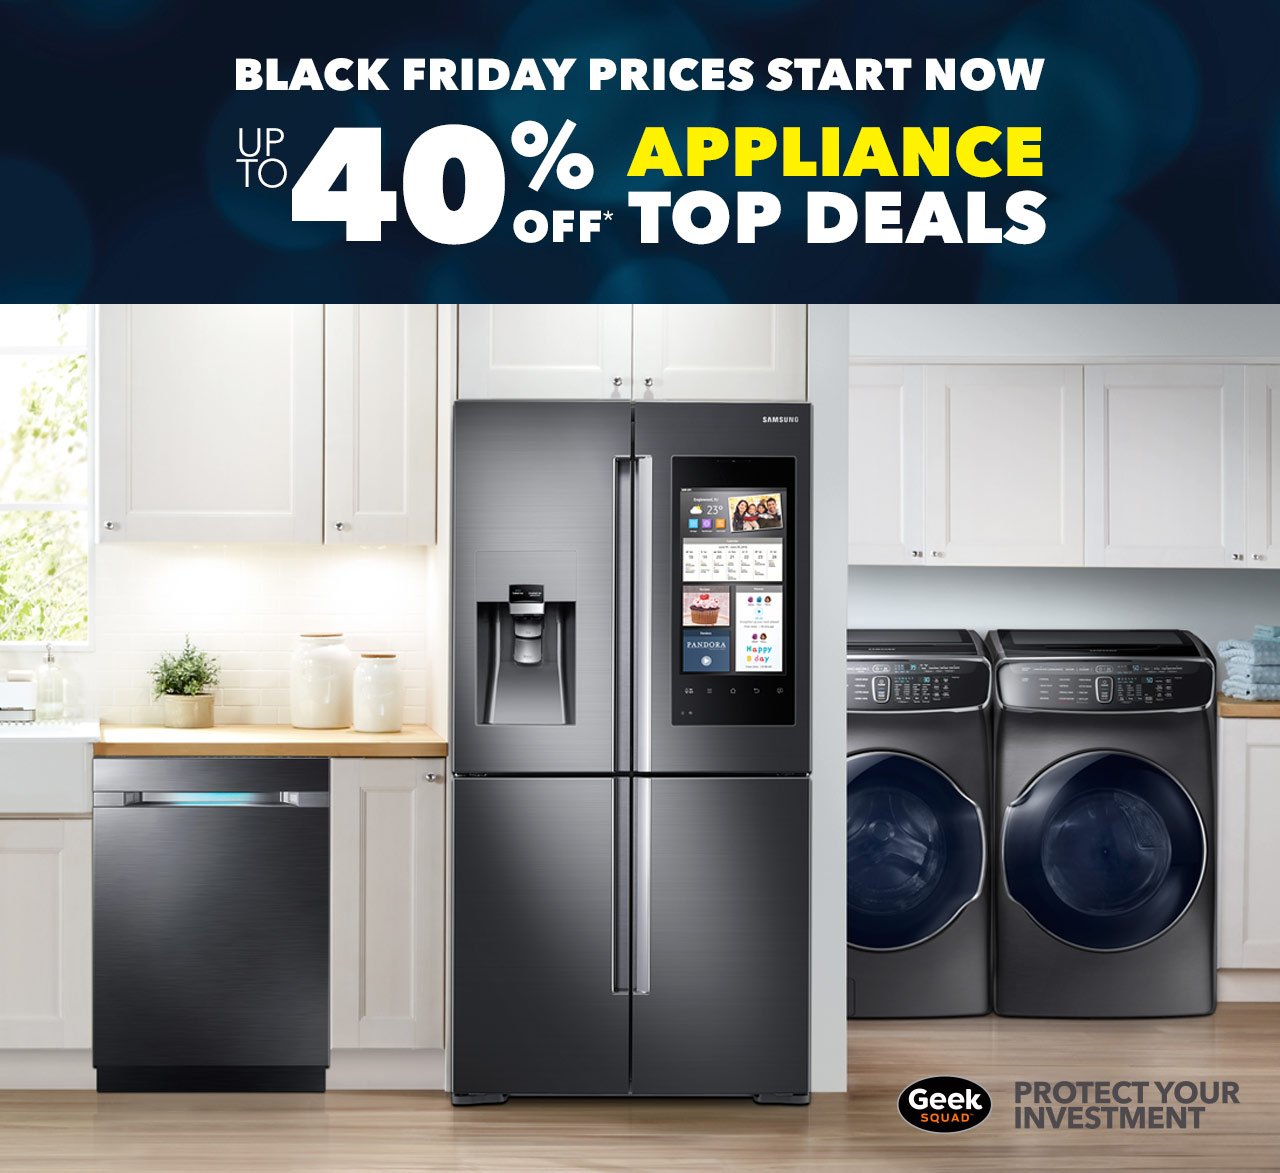 Best Buy Black Friday Prices are here—Up to 40 off Appliance Top